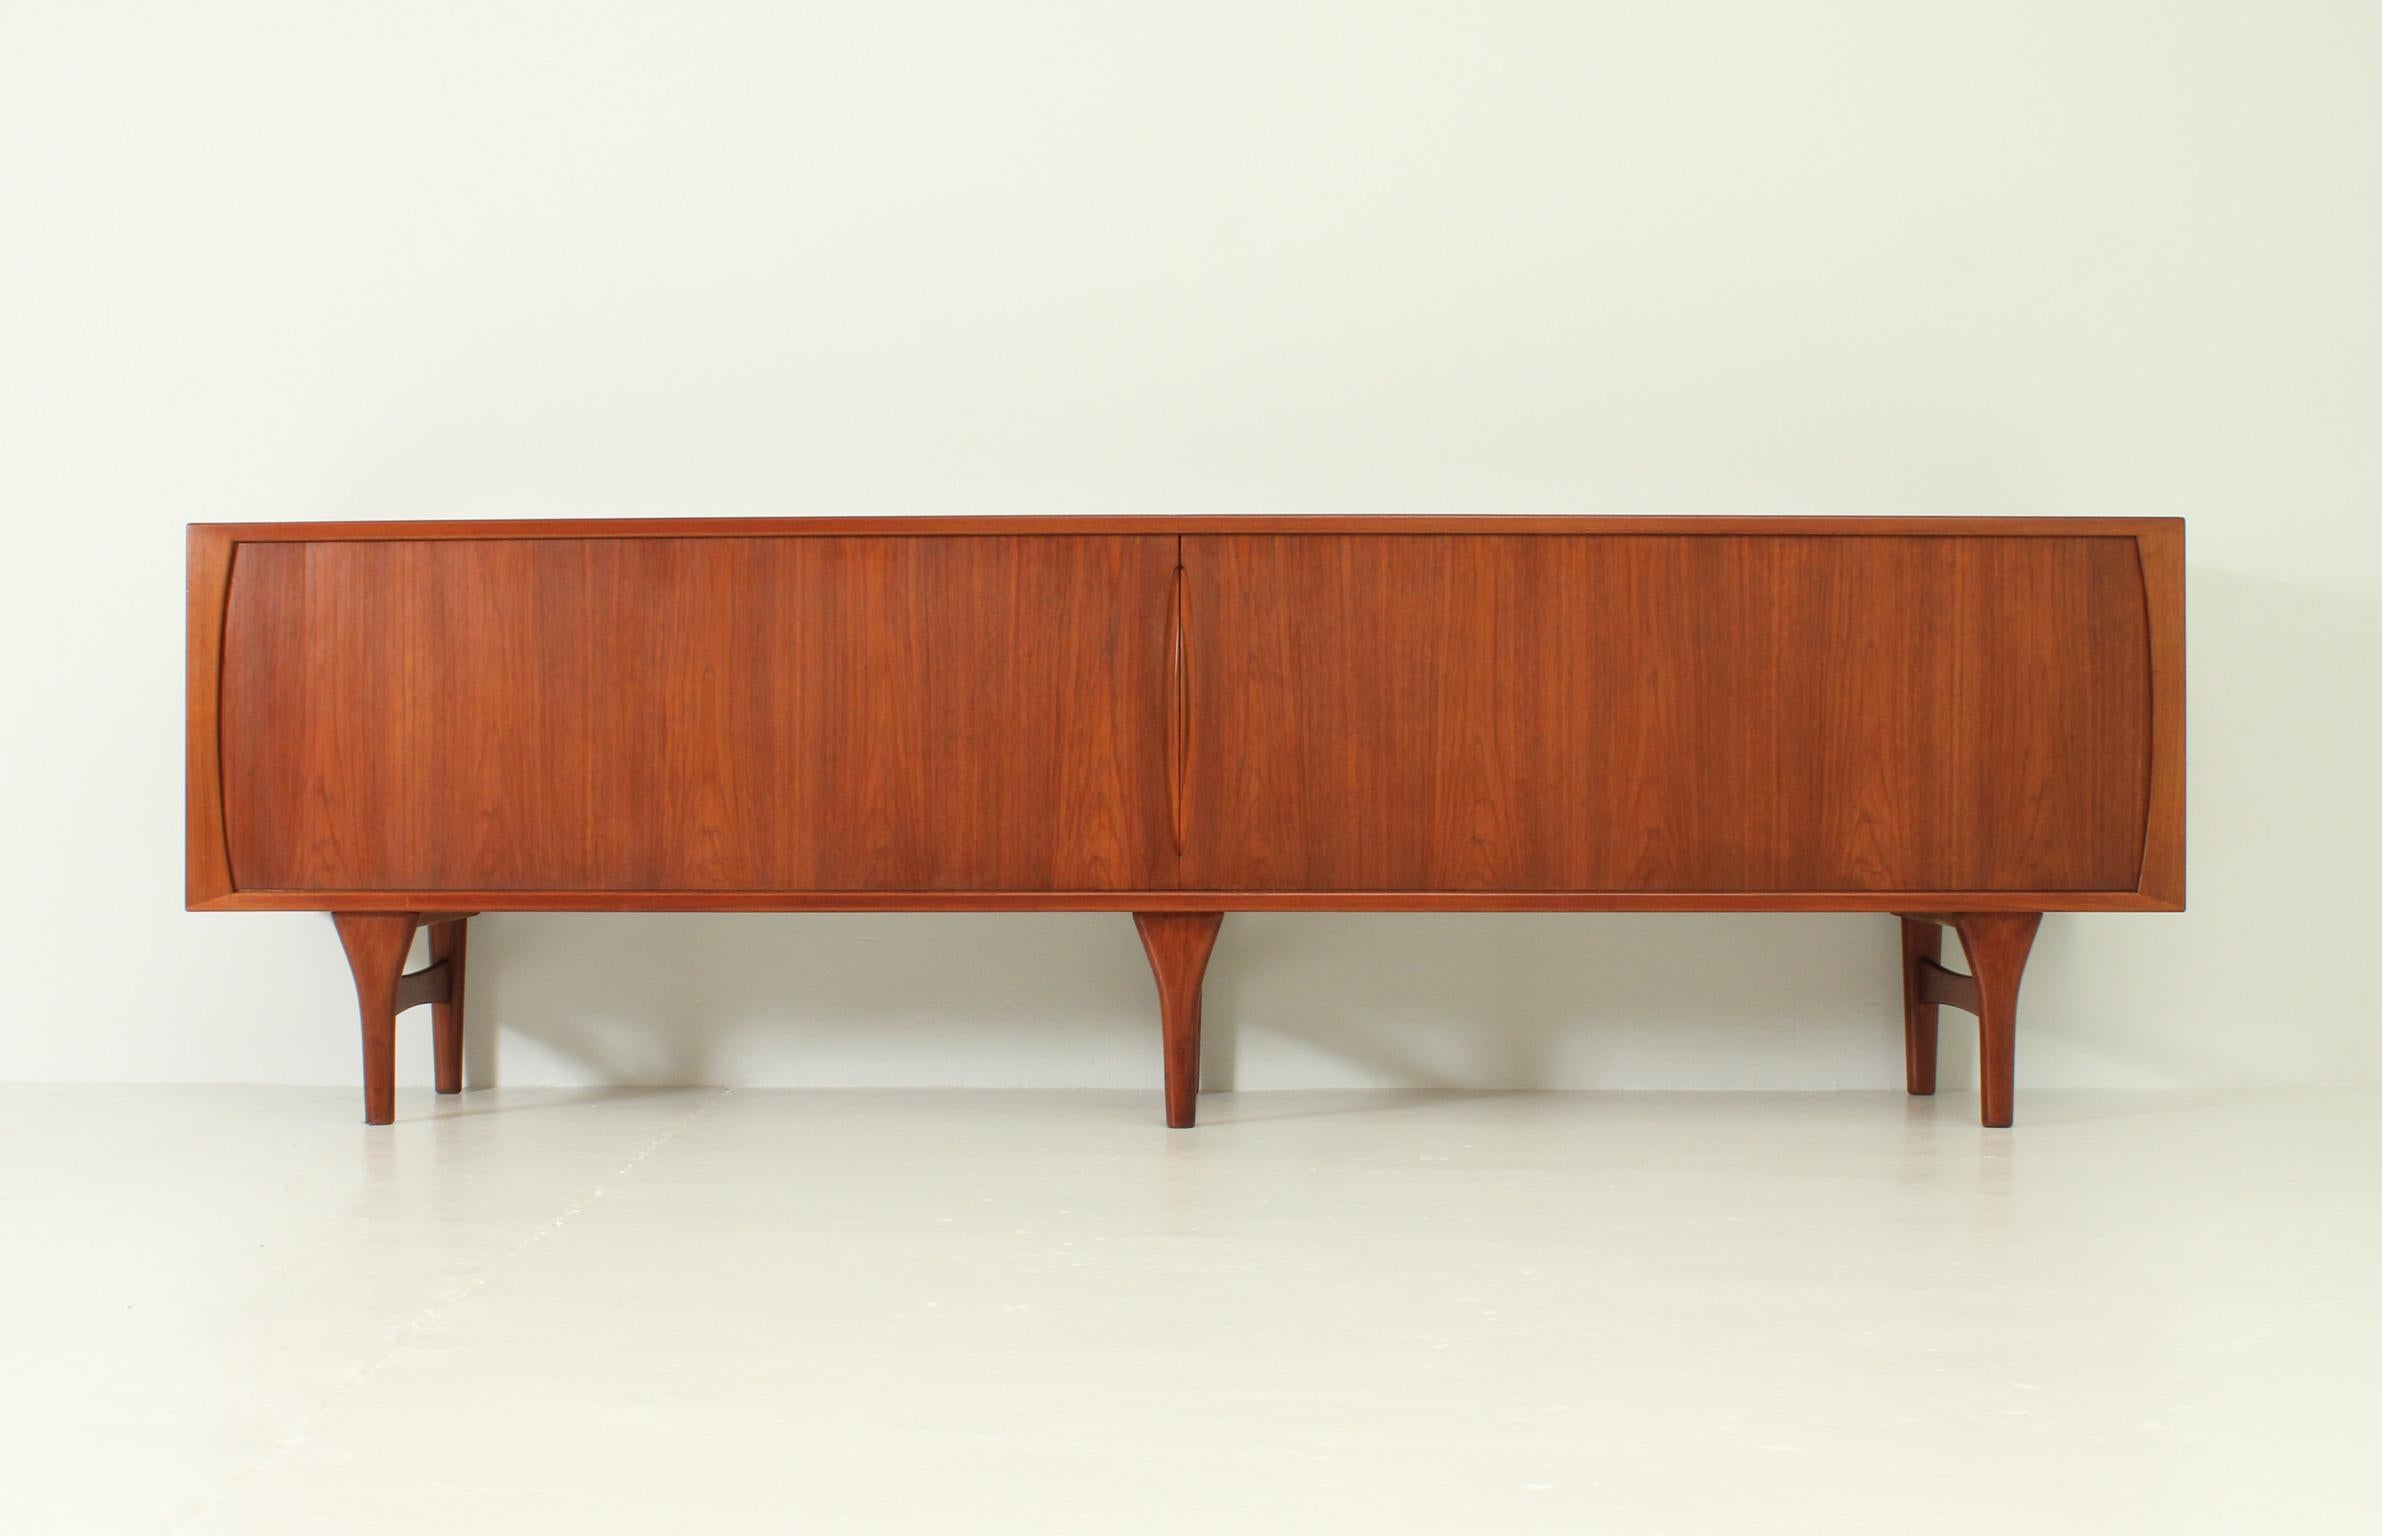 Extra large sideboard designed in 1962 by danish architect Henning Kjaernulf for Bruno Hansen. Sideboard in teak and oak wood with exceptional quality. Interior with ten drawers and two large spaces with internal shelving, sliding doors.